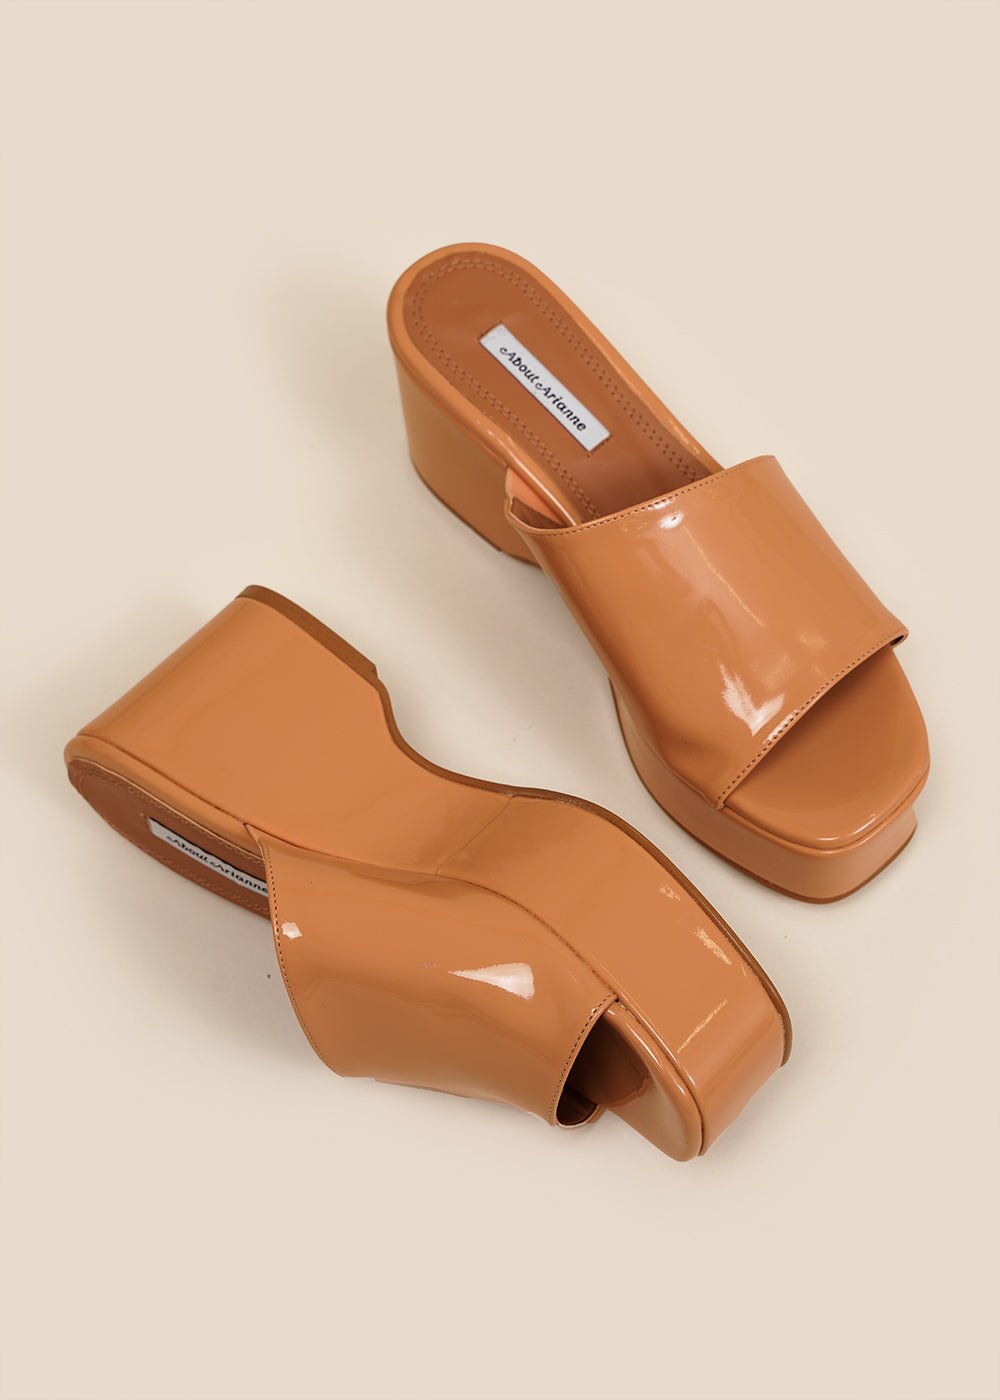 About Arianne Peach Giuliana Platform Sandals - New Classics Studios Sustainable Ethical Fashion Canada